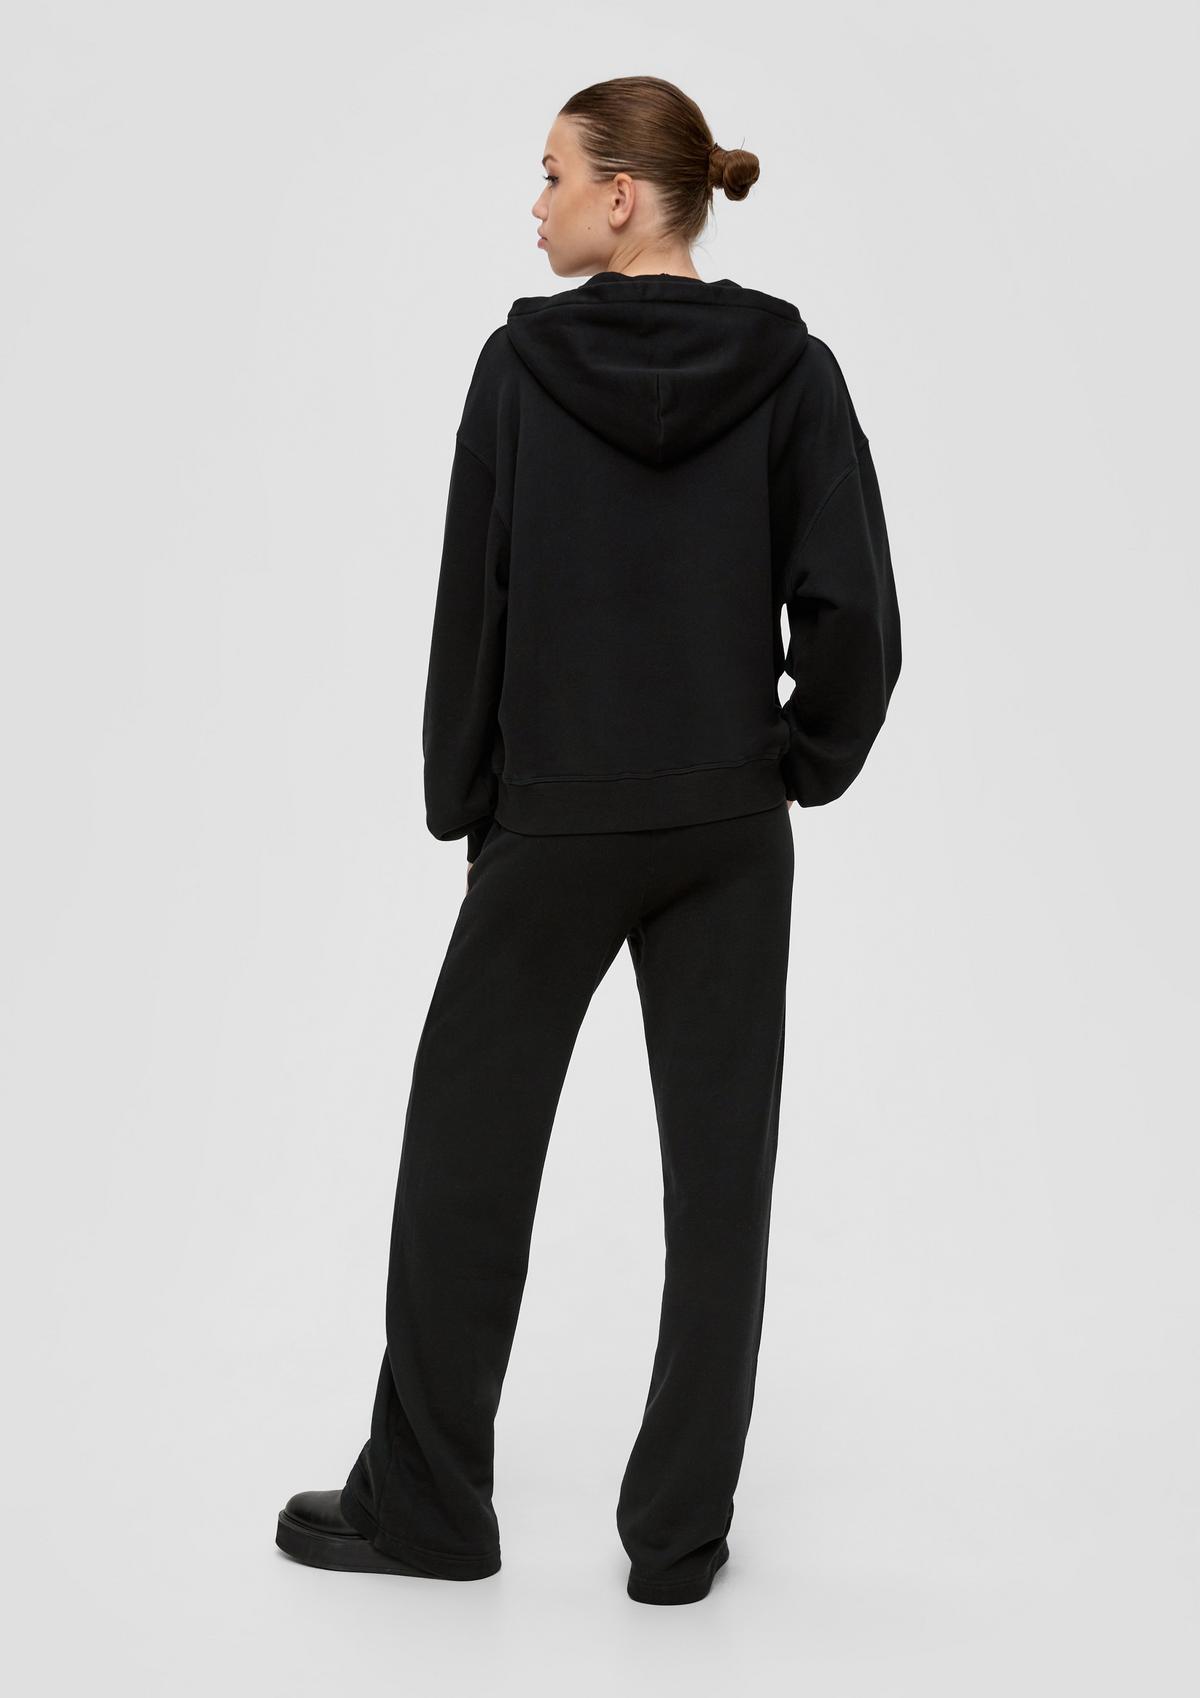 s.Oliver Sweat hoodie with stitching